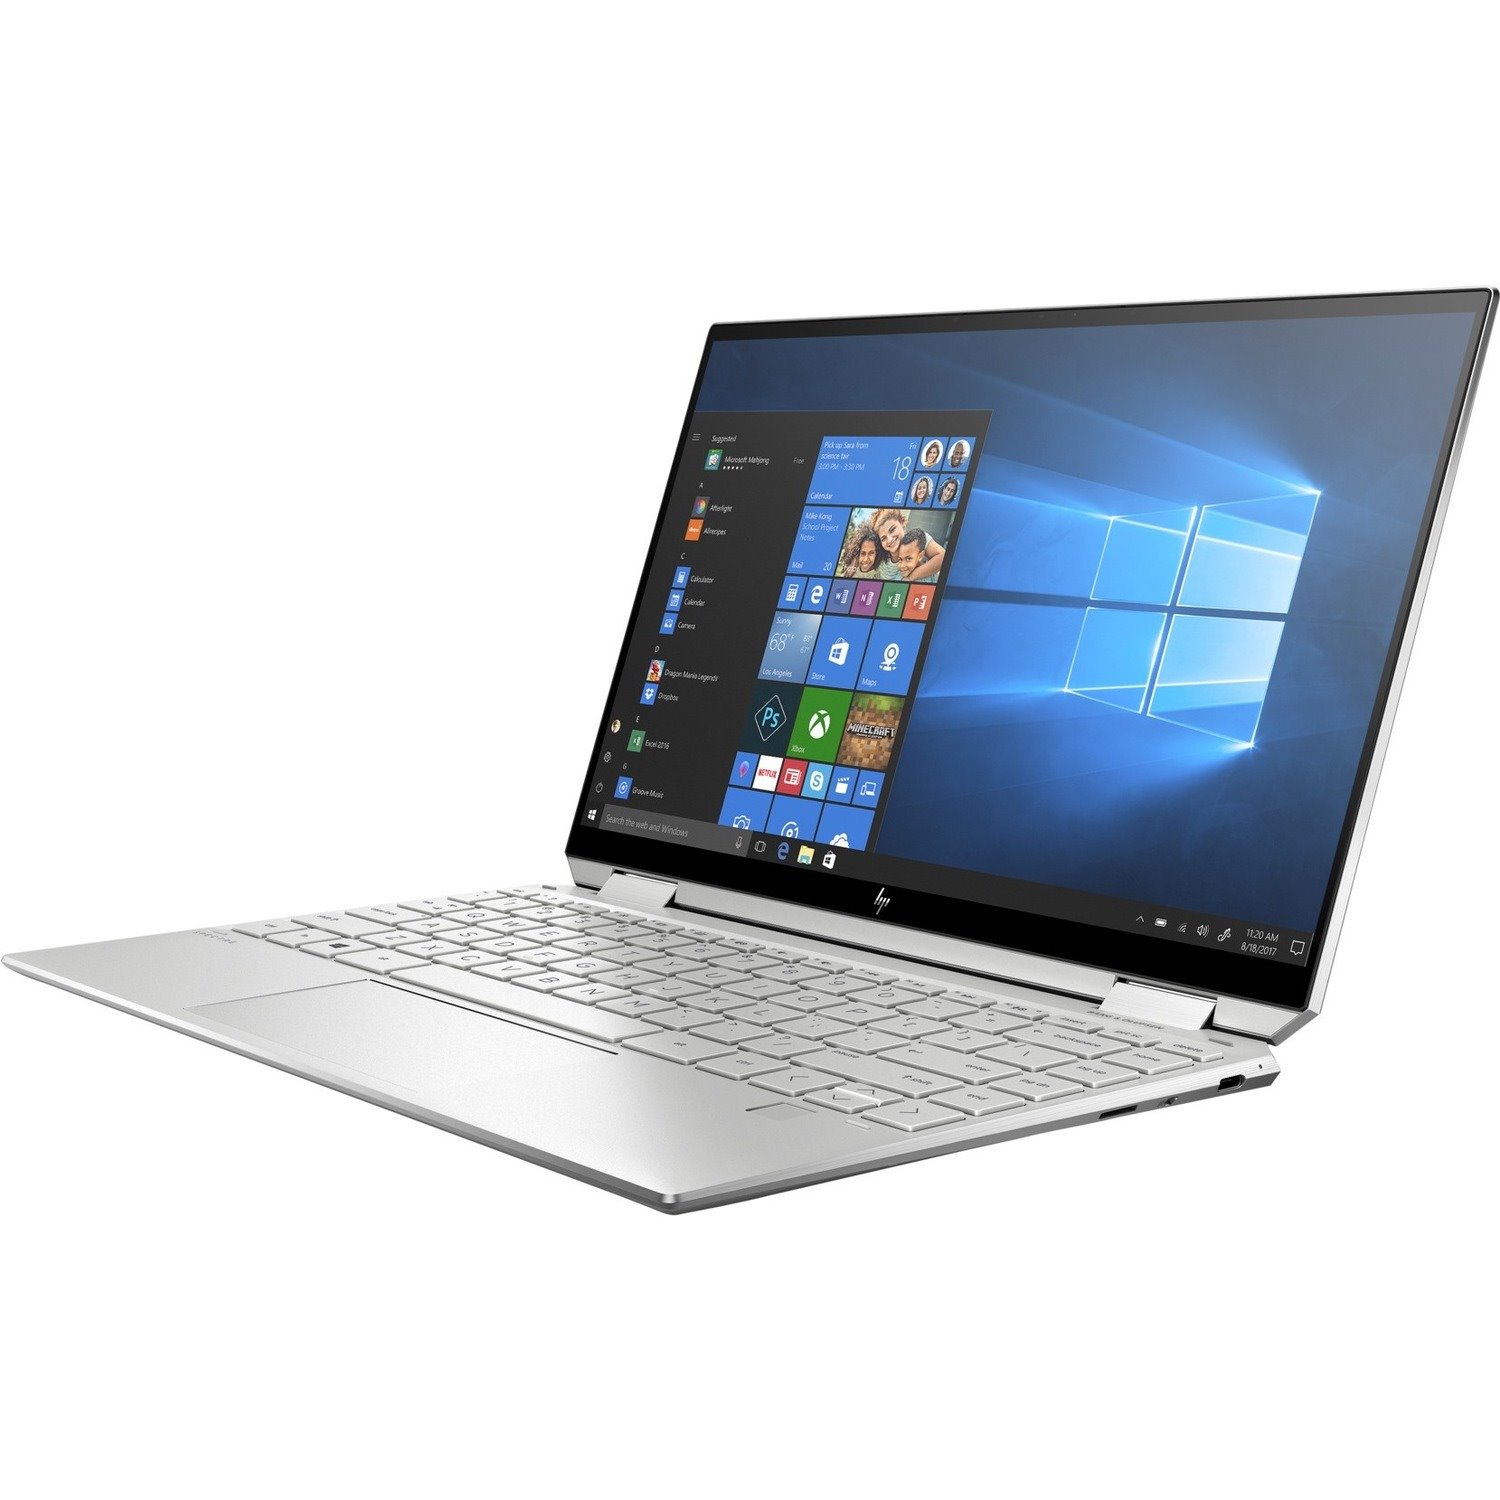 HP Spectre x360 13-aw0000 13-aw0126tu 13.3" Touchscreen Convertible 2 in 1 Notebook - 4K UHD - 3840 x 2160 - Intel Core i7 10th Gen i7-1065G7 Quad-core (4 Core) 1.30 GHz - 16 GB Total RAM - 1 TB SSD - Natural Silver